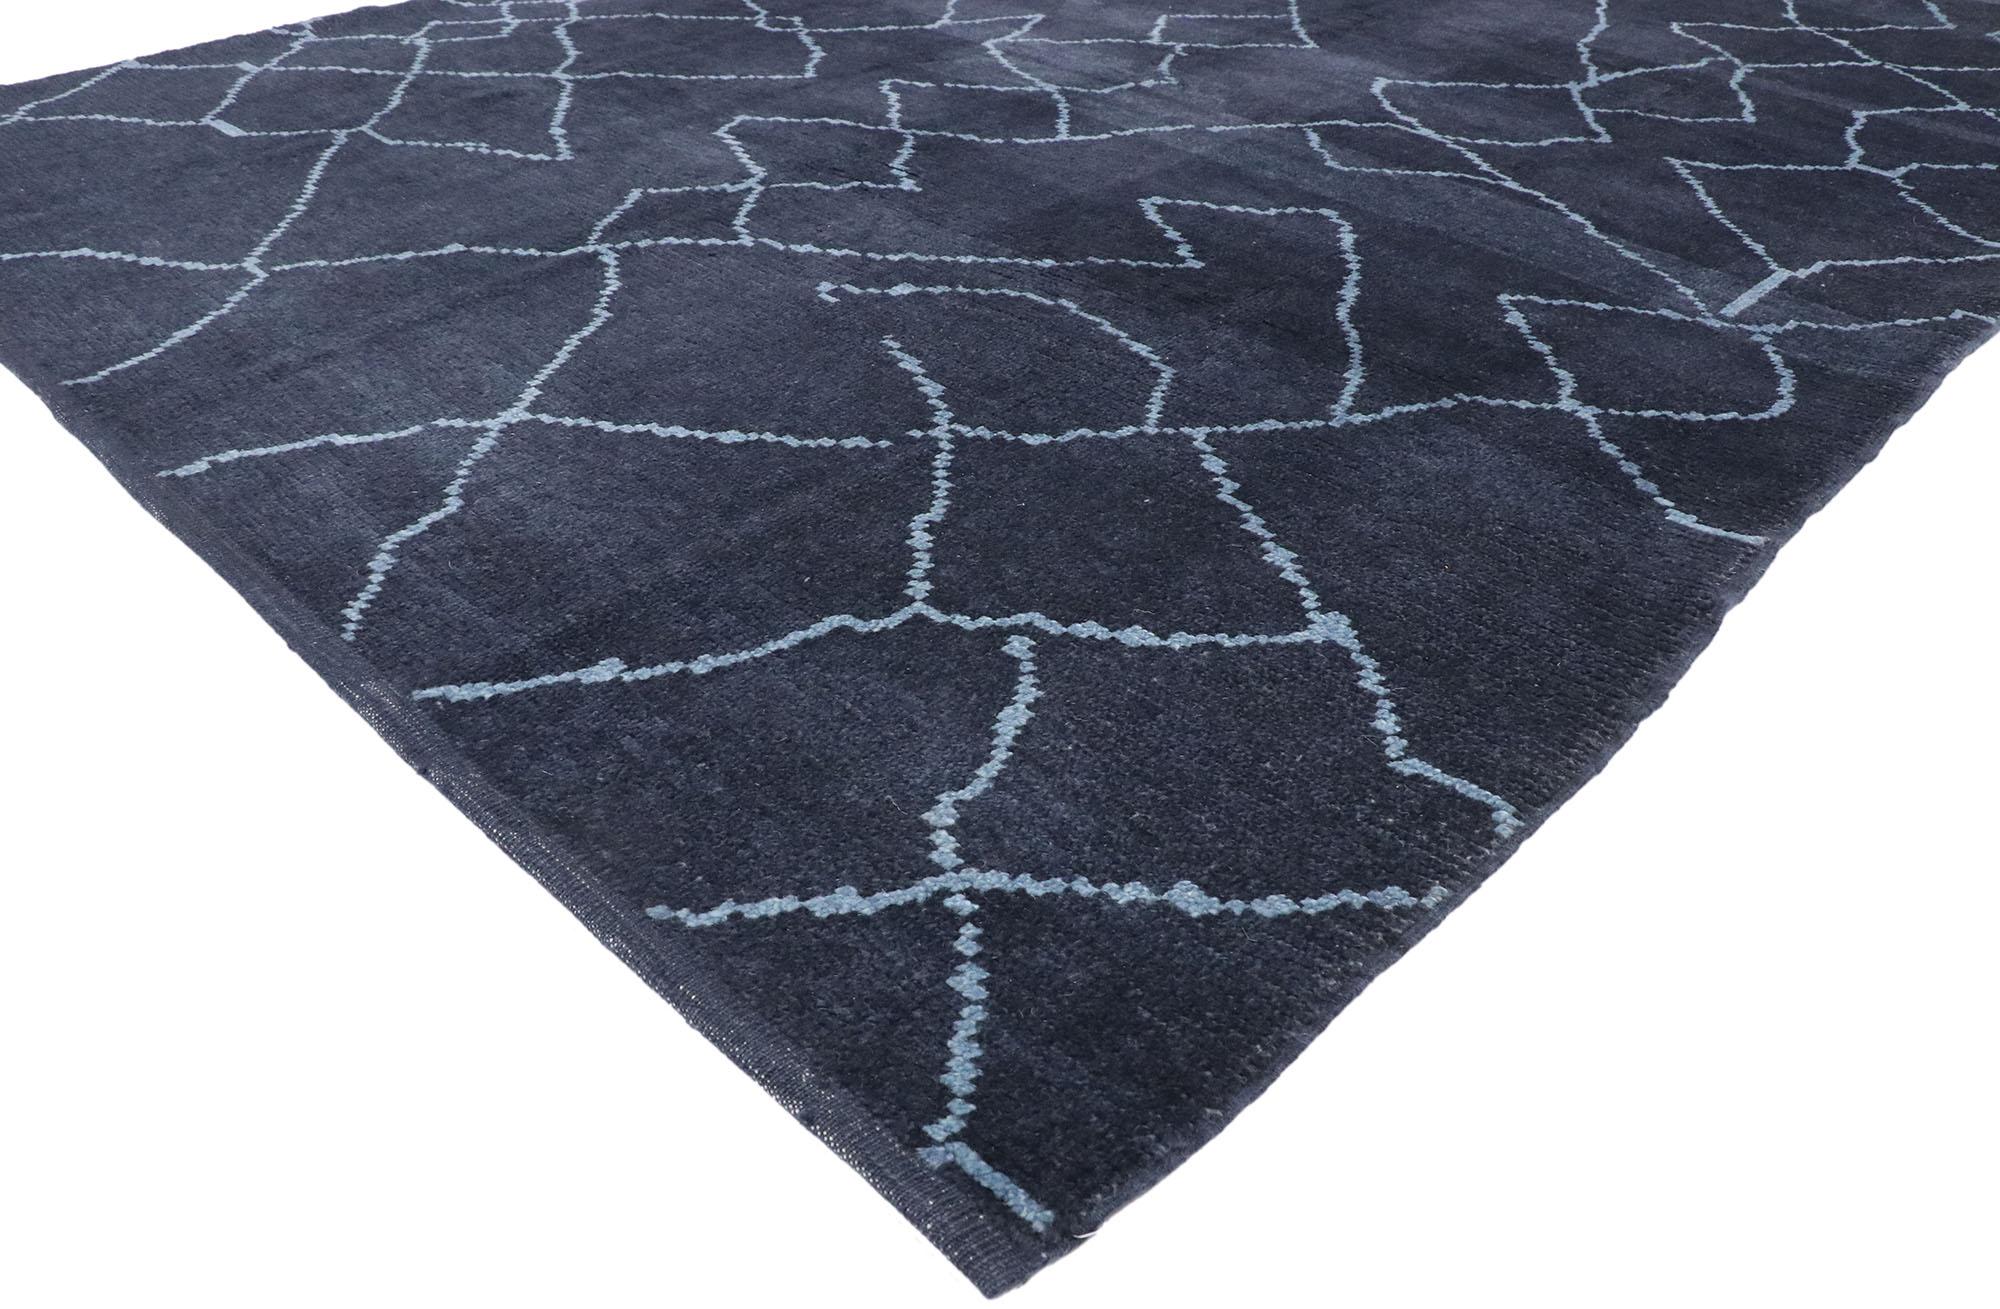 53450, new contemporary Moroccan style rug with modern asymmetrical diamond pattern. Dark sultry navy blue hues and rich waves of abrash create an endless fascinating effect in this hand knotted wool contemporary Moroccan style area rug. Delicate